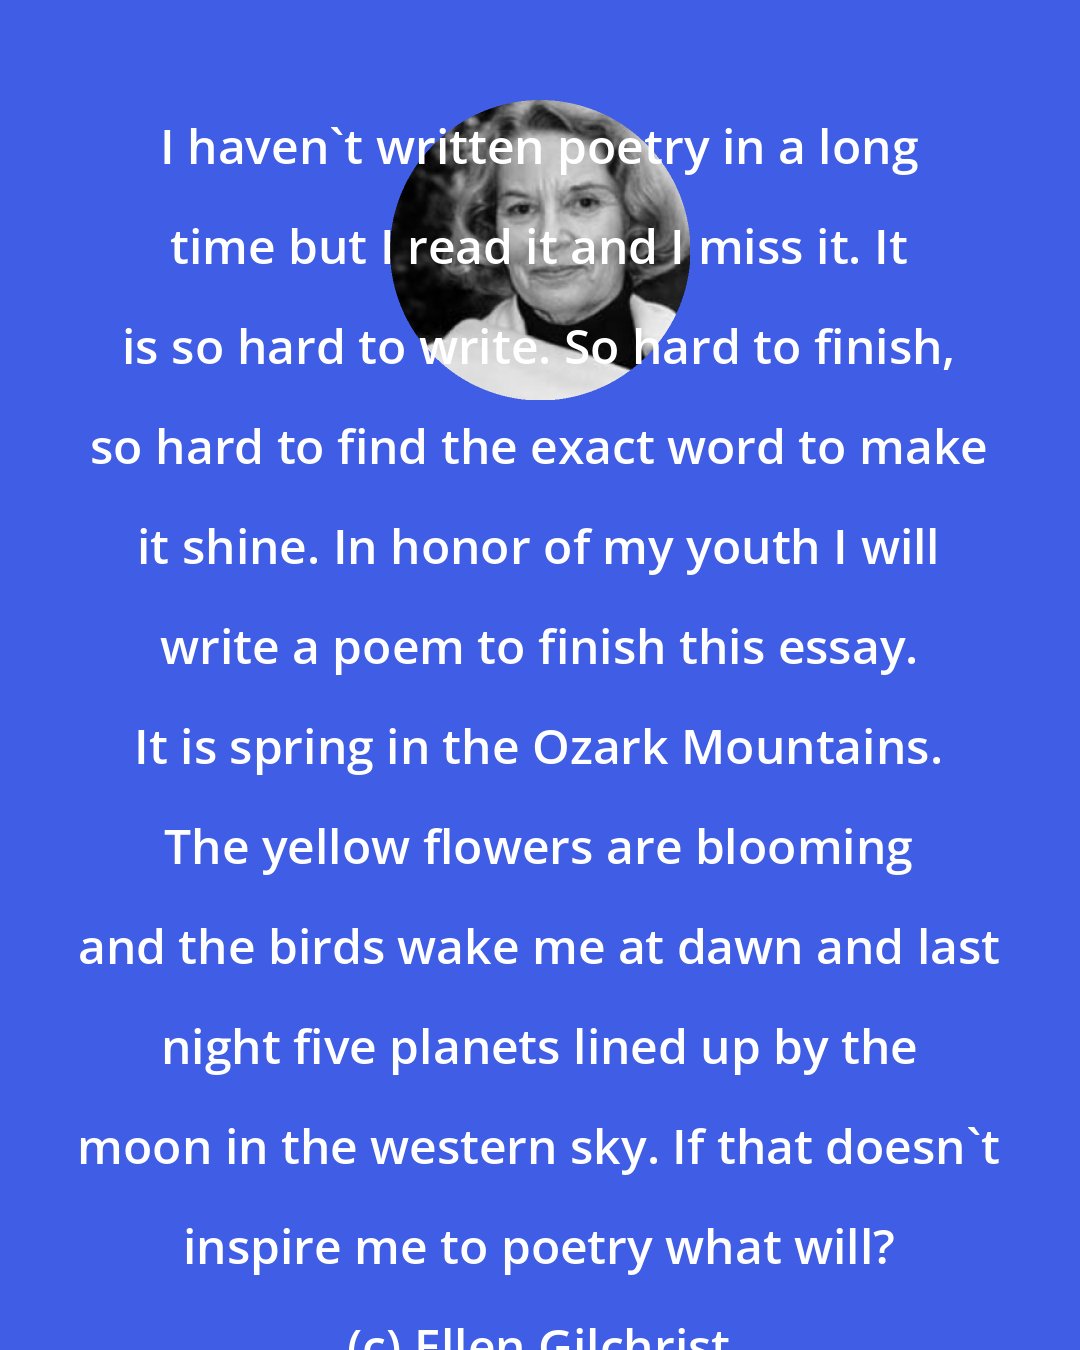 Ellen Gilchrist: I haven't written poetry in a long time but I read it and I miss it. It is so hard to write. So hard to finish, so hard to find the exact word to make it shine. In honor of my youth I will write a poem to finish this essay. It is spring in the Ozark Mountains. The yellow flowers are blooming and the birds wake me at dawn and last night five planets lined up by the moon in the western sky. If that doesn't inspire me to poetry what will?